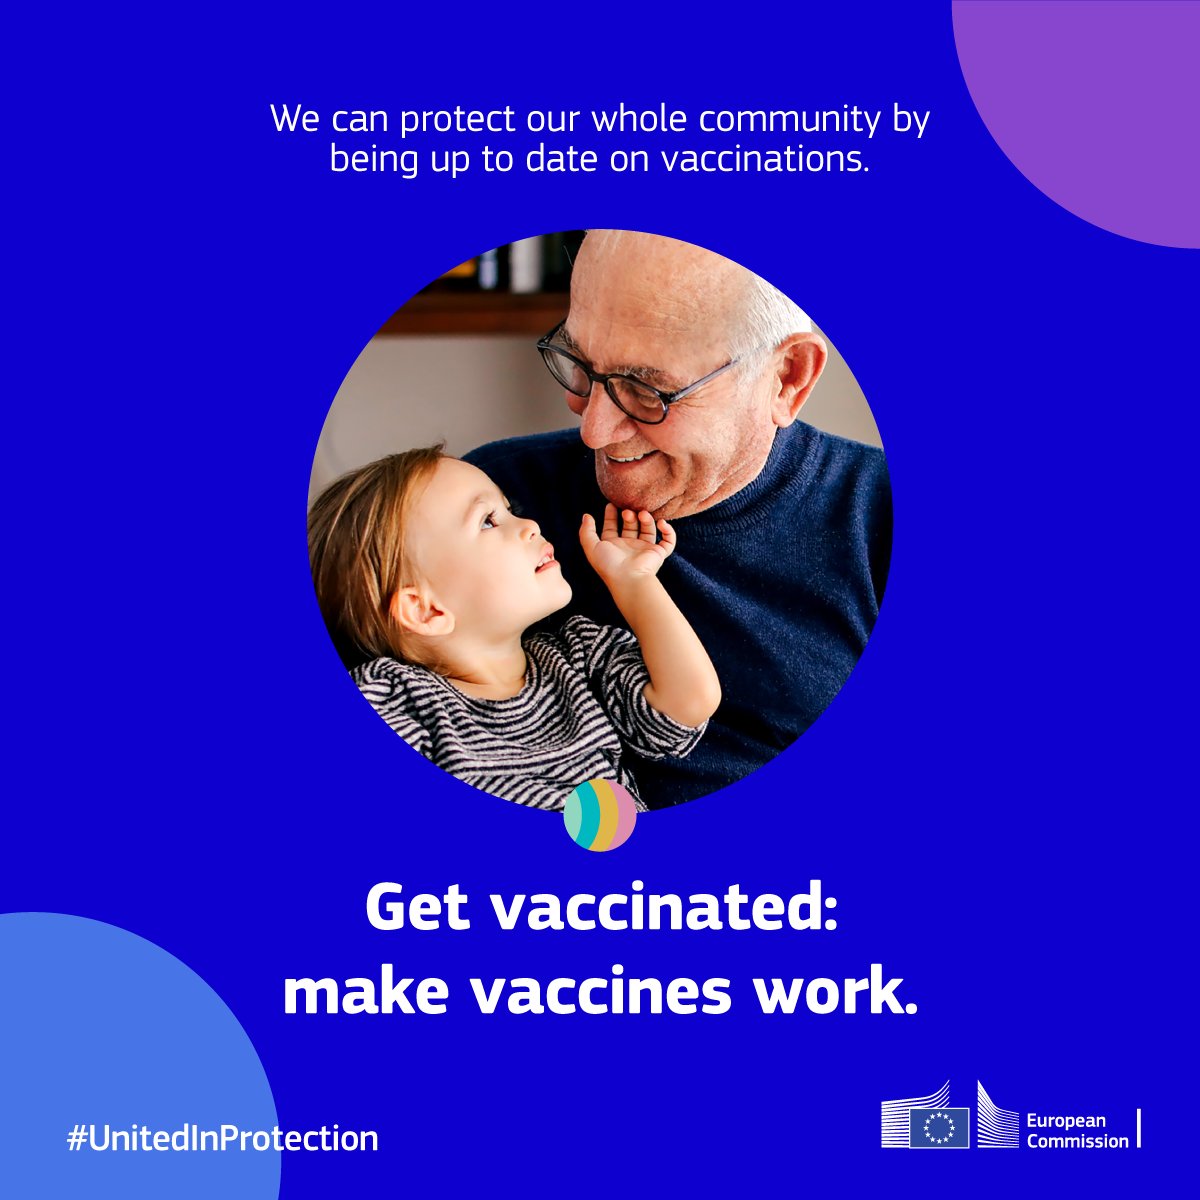 The EFN supports the European Commission’s #UnitedInProtection campaign. For reliable information on vaccines click here: shorturl.at/fglQT. #EFN #EIW2024 #Nurses #Prevention #Longlifeforall #EPI #Vaccination #UnitedInProtection #CoalitionForVaccination